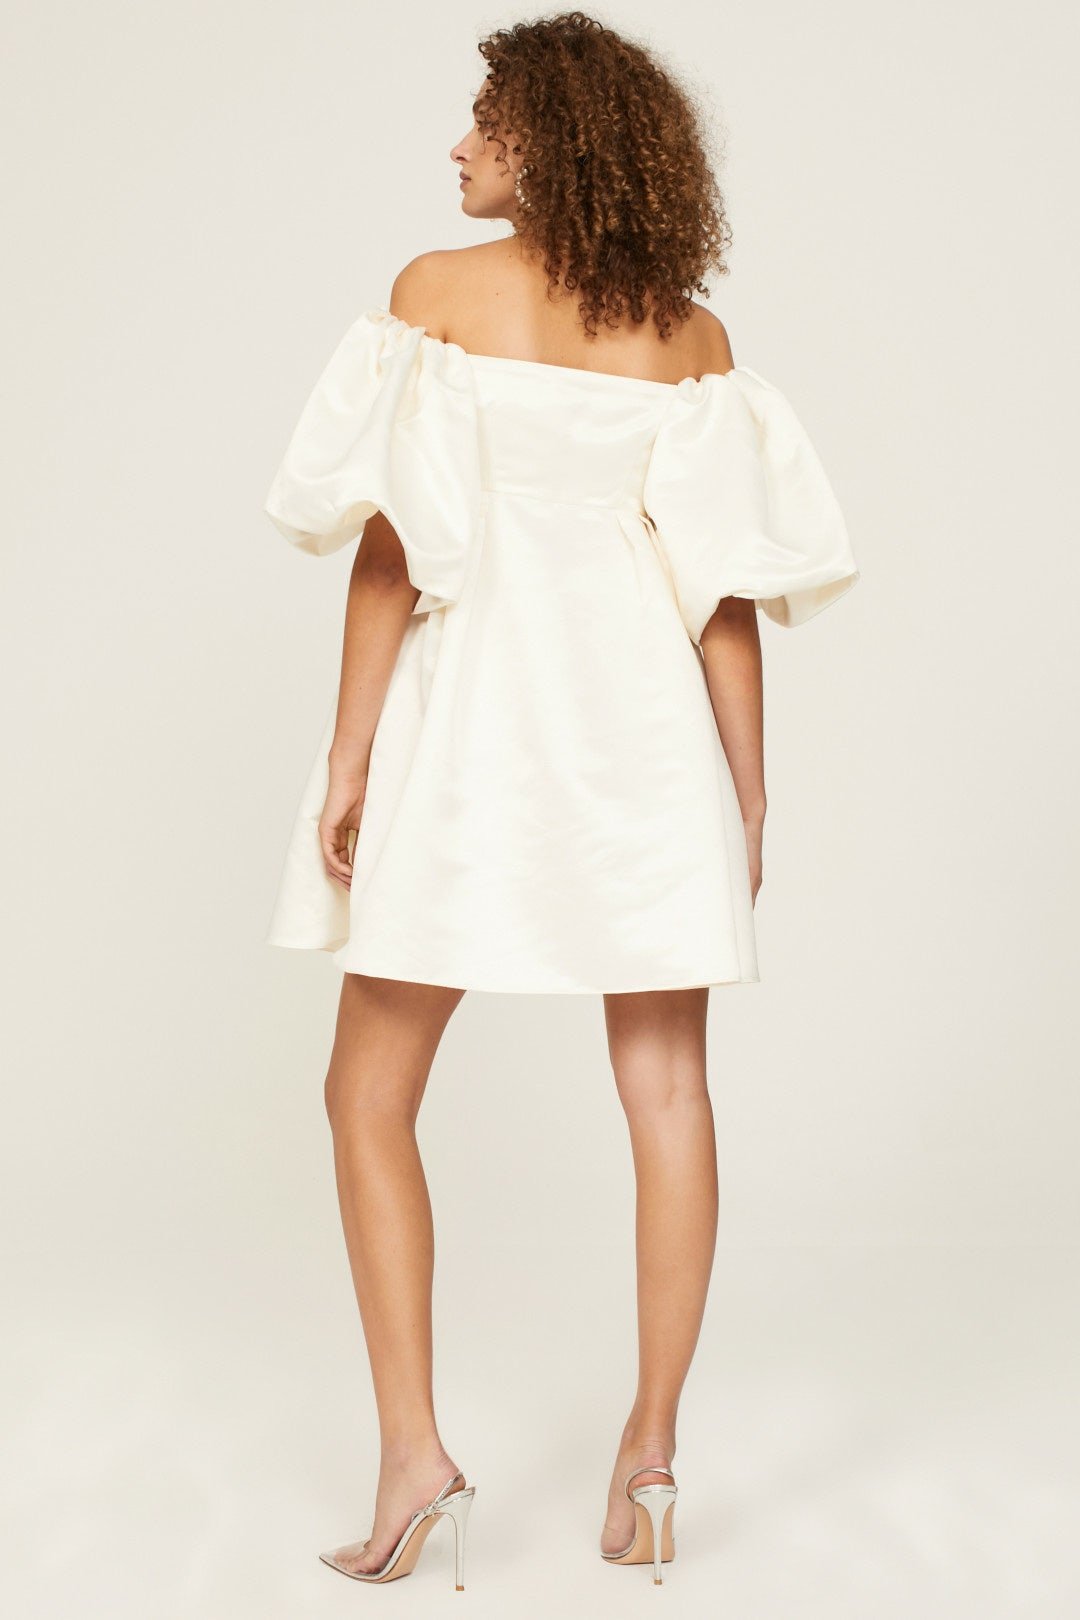 short white satin dress rent the runway collective